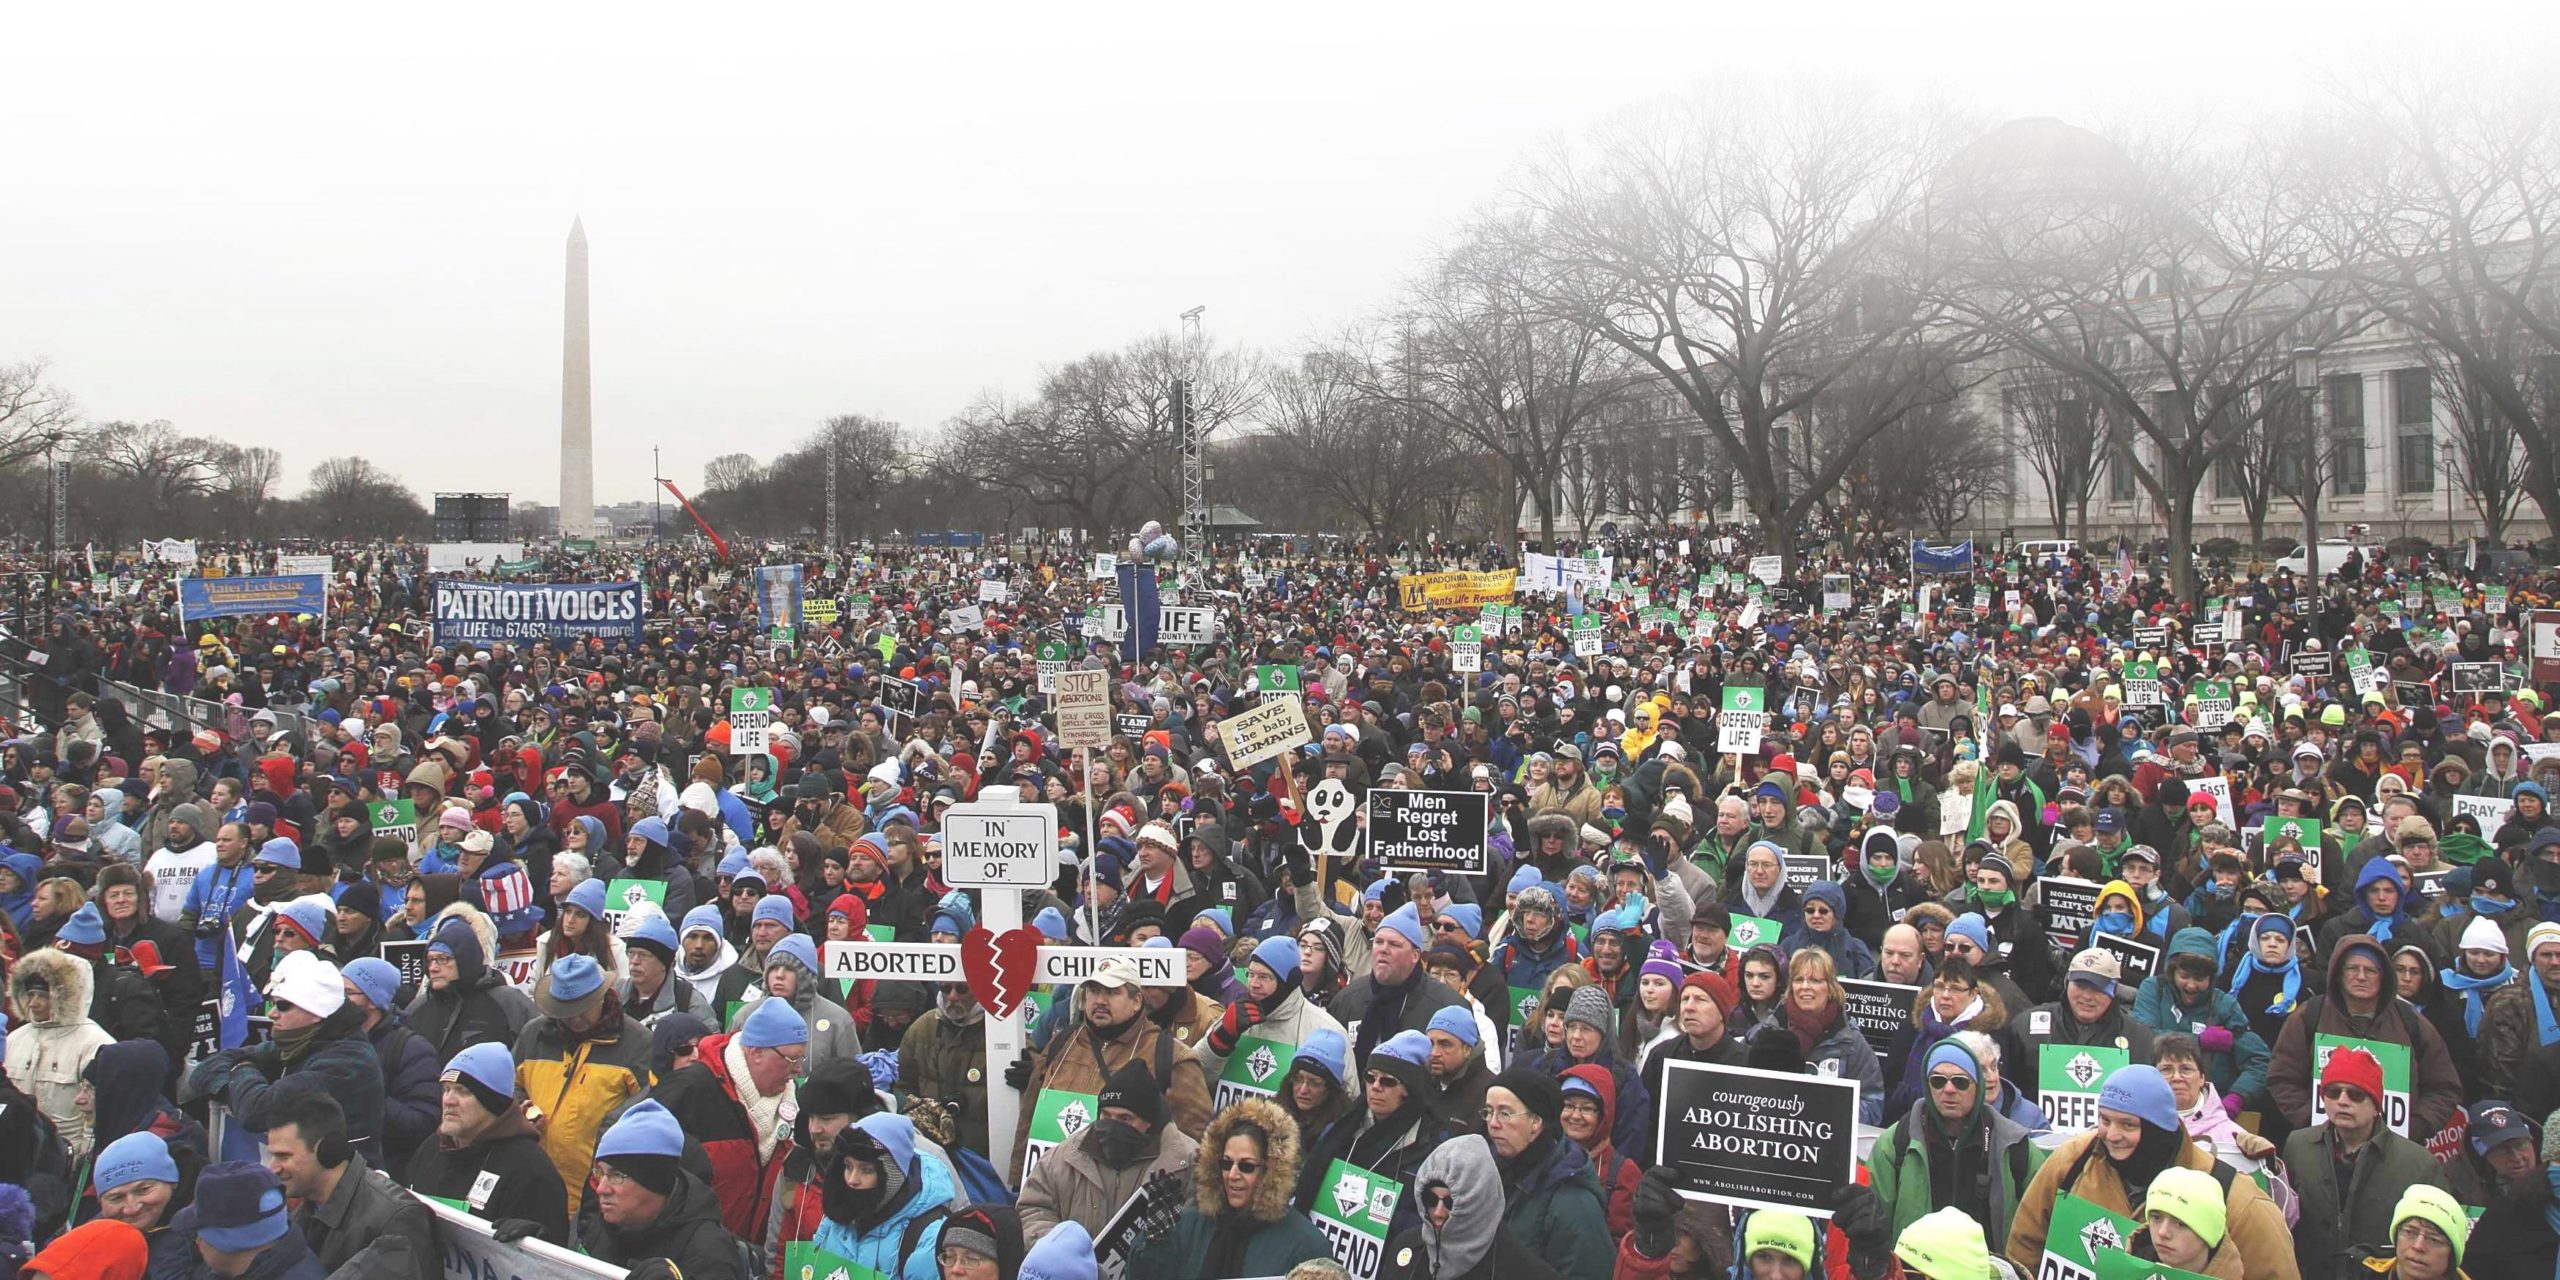 March for life crowd